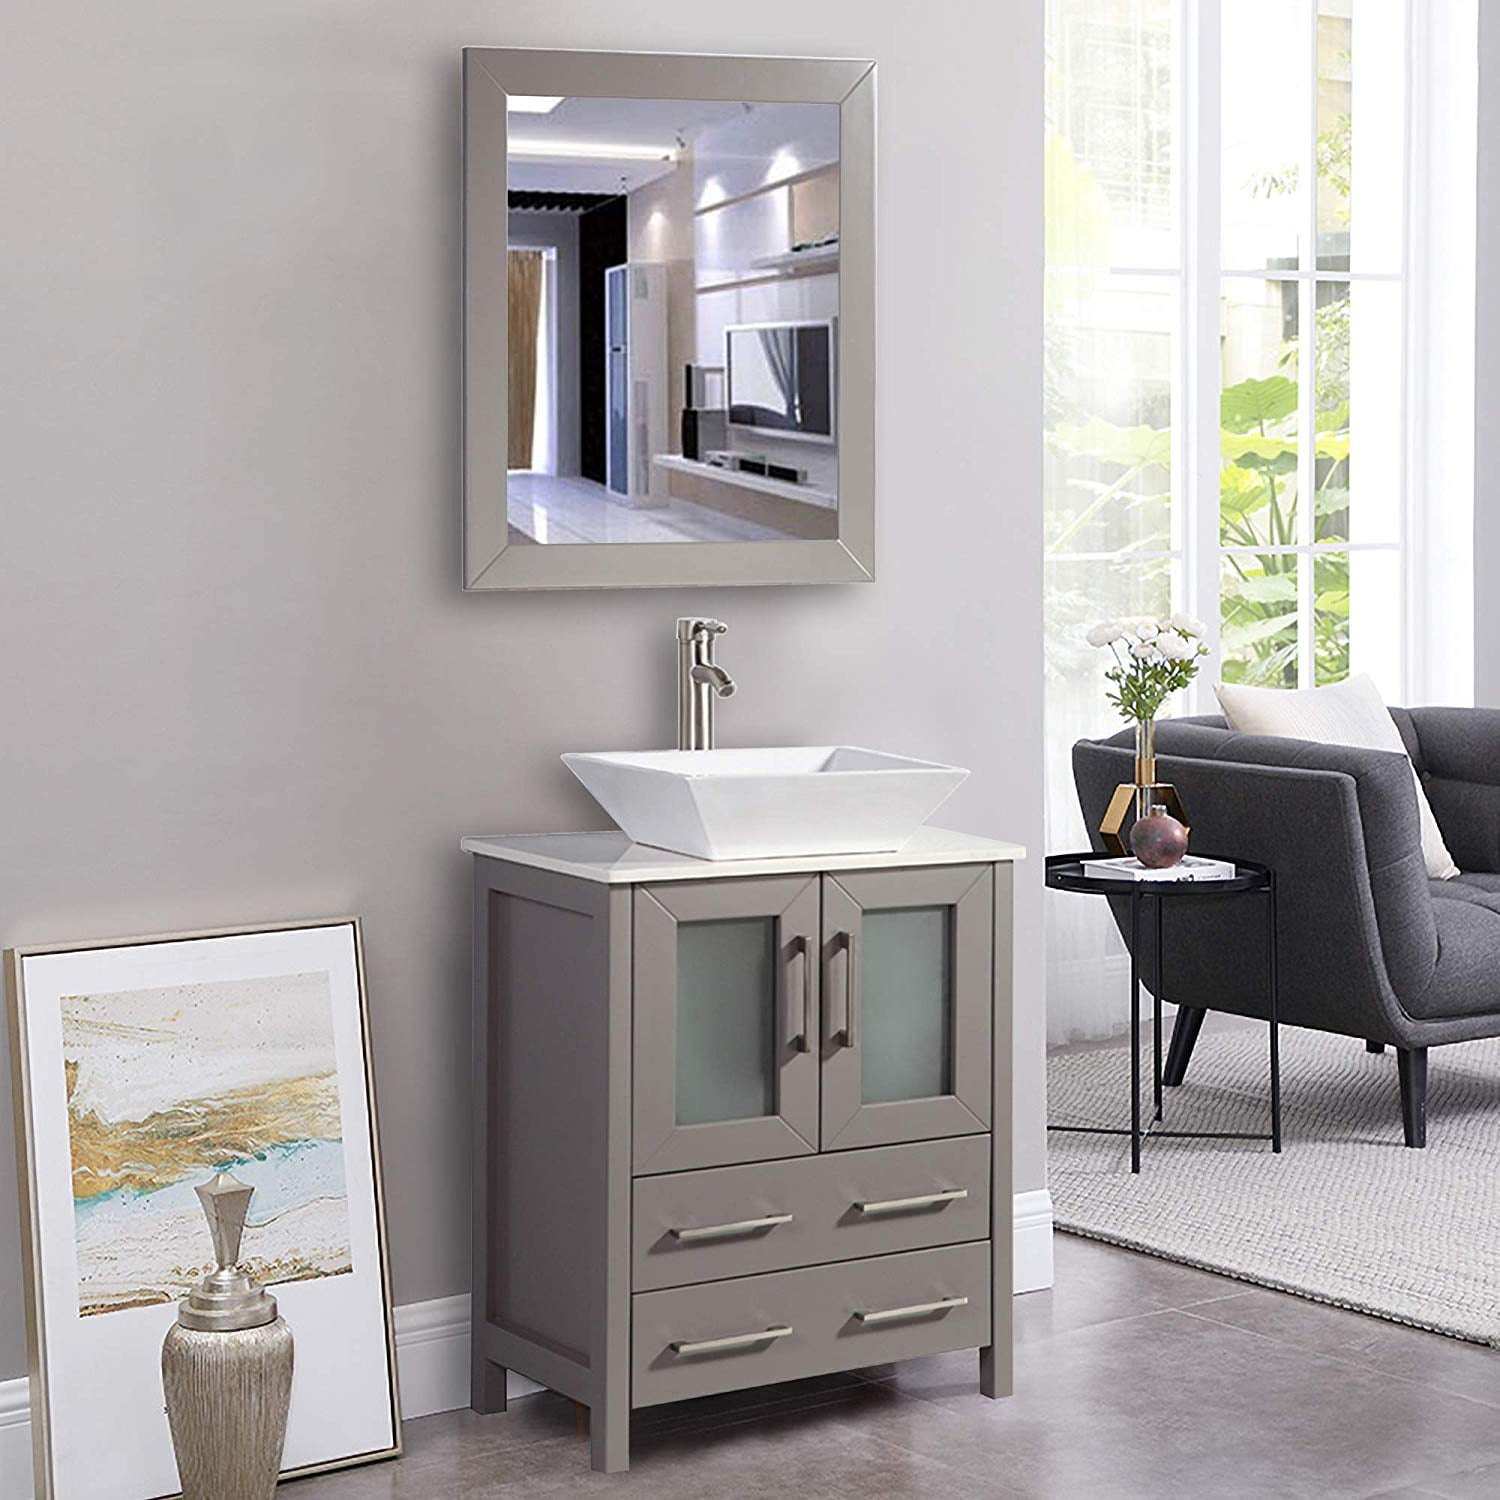 vanity cabinets for bathrooms